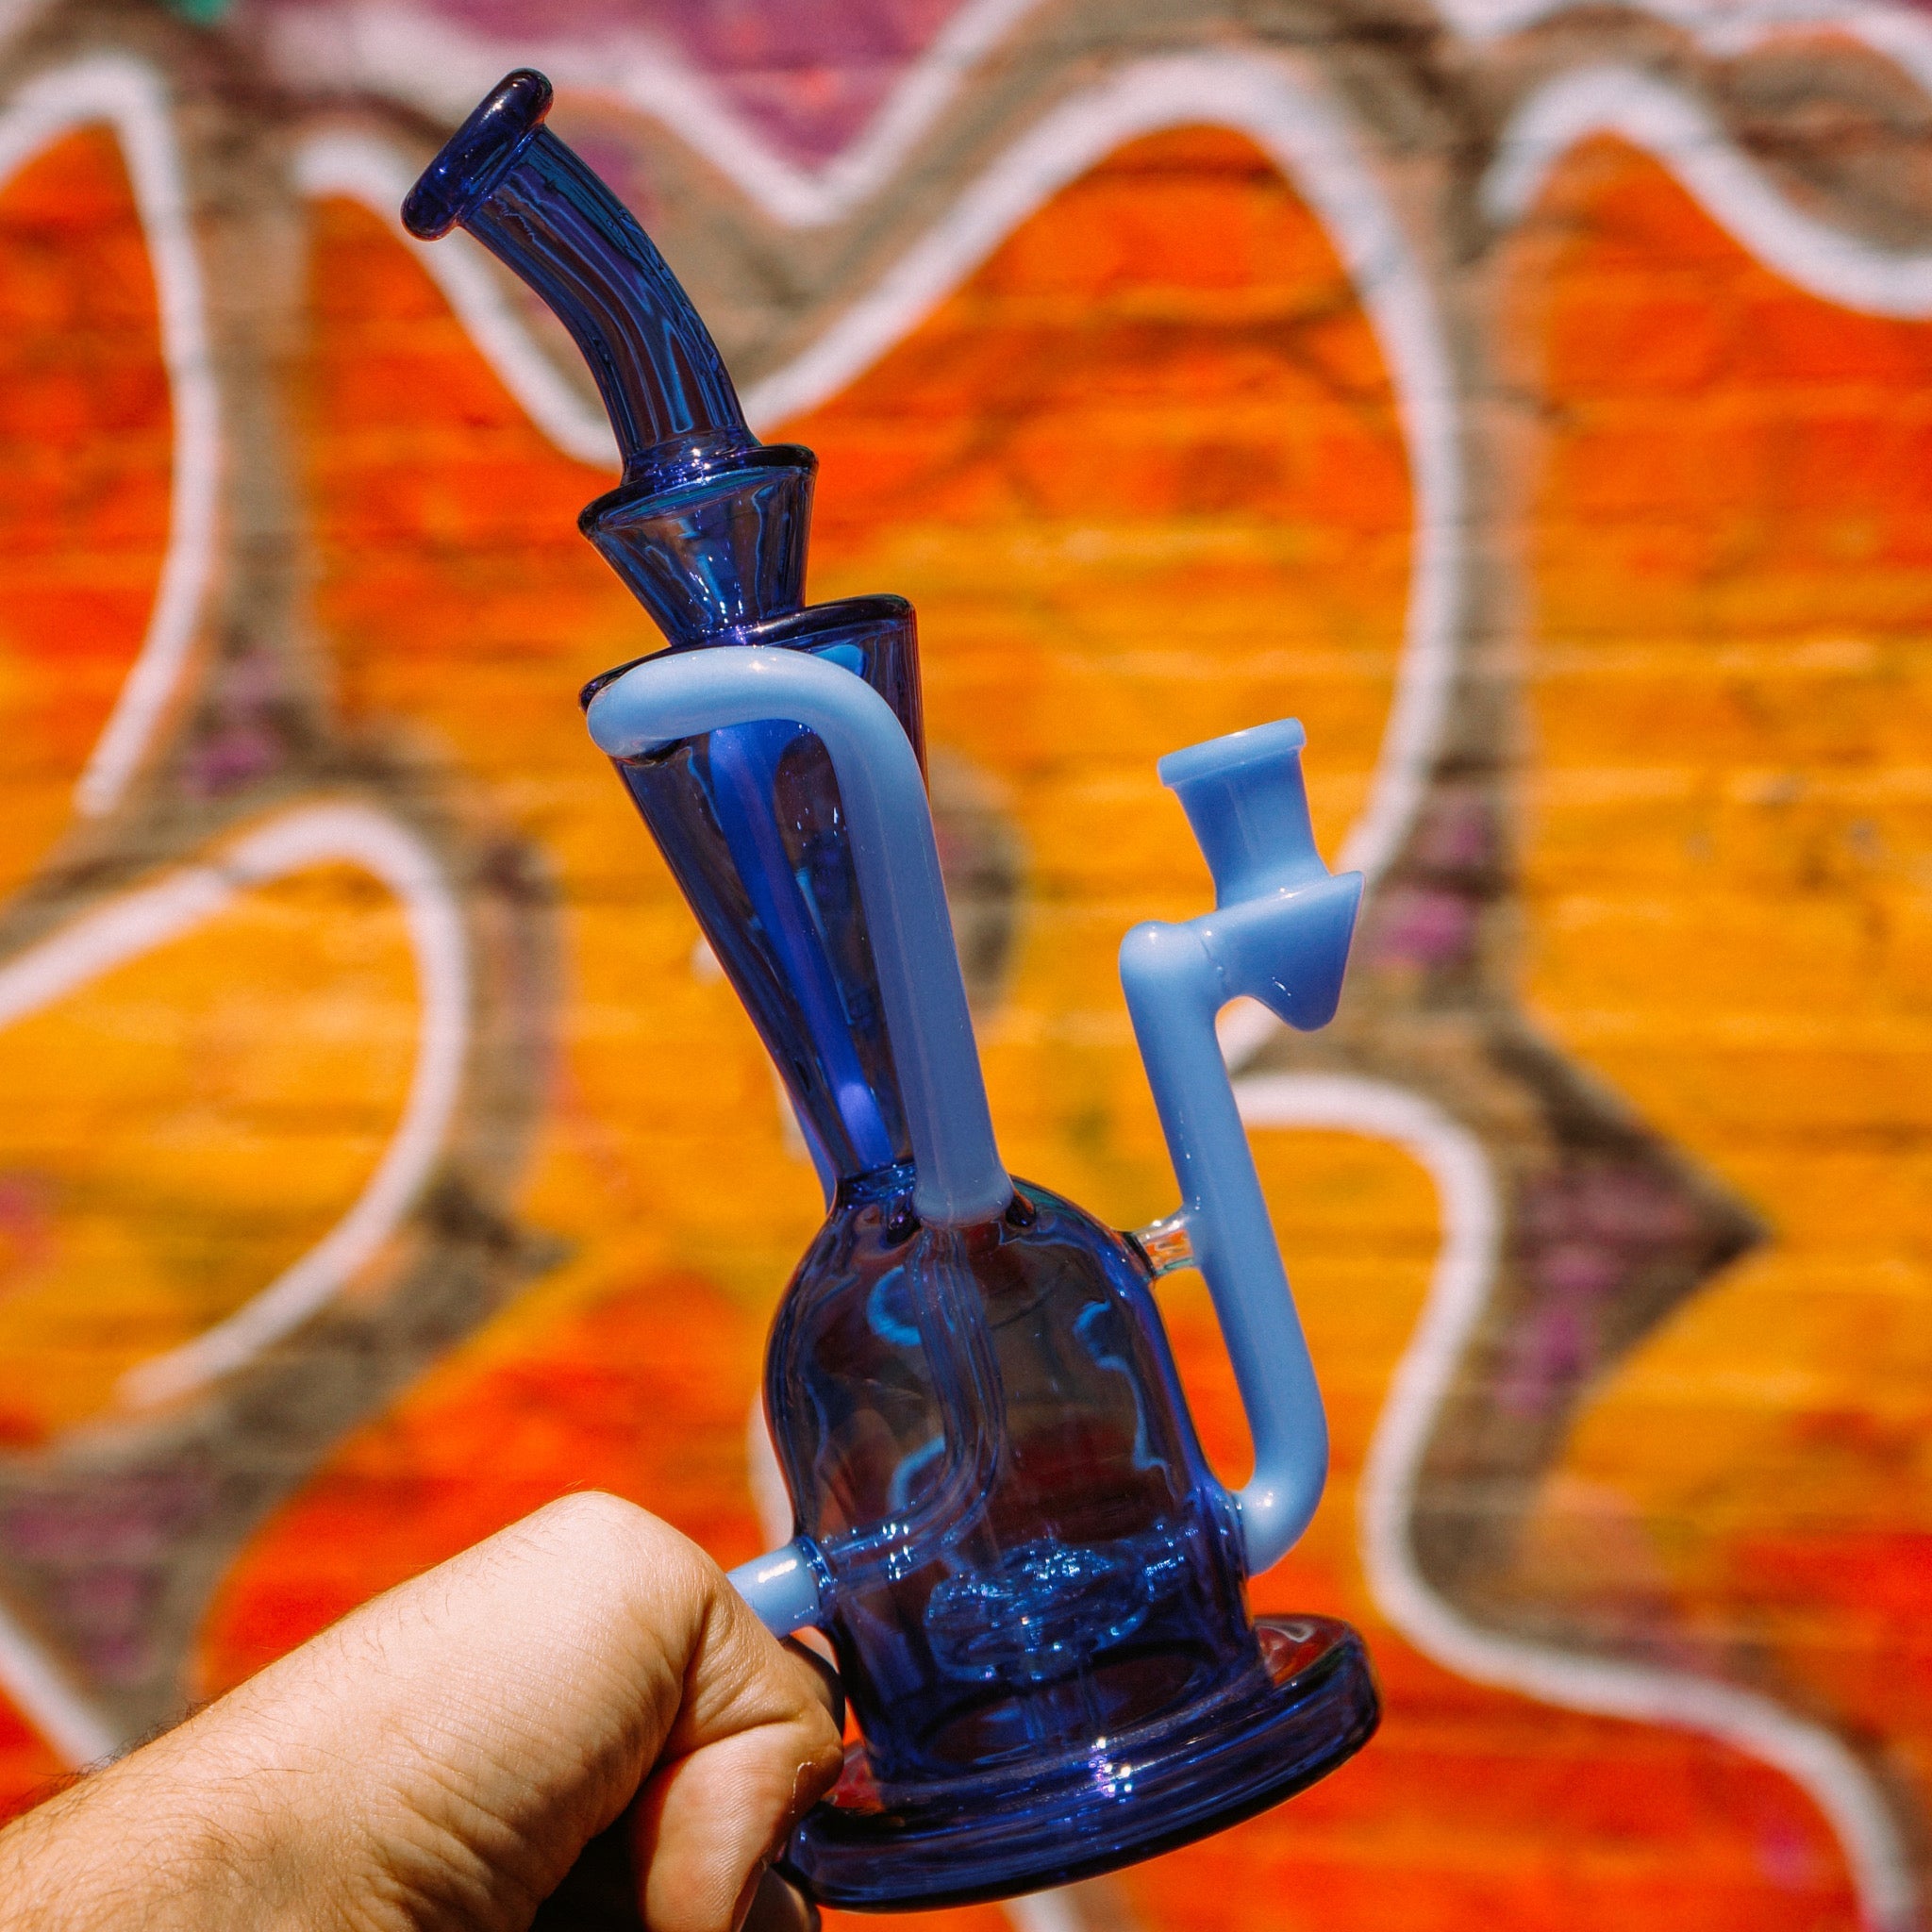 New AFM Glass Bongs and Dab Rigs arrivals